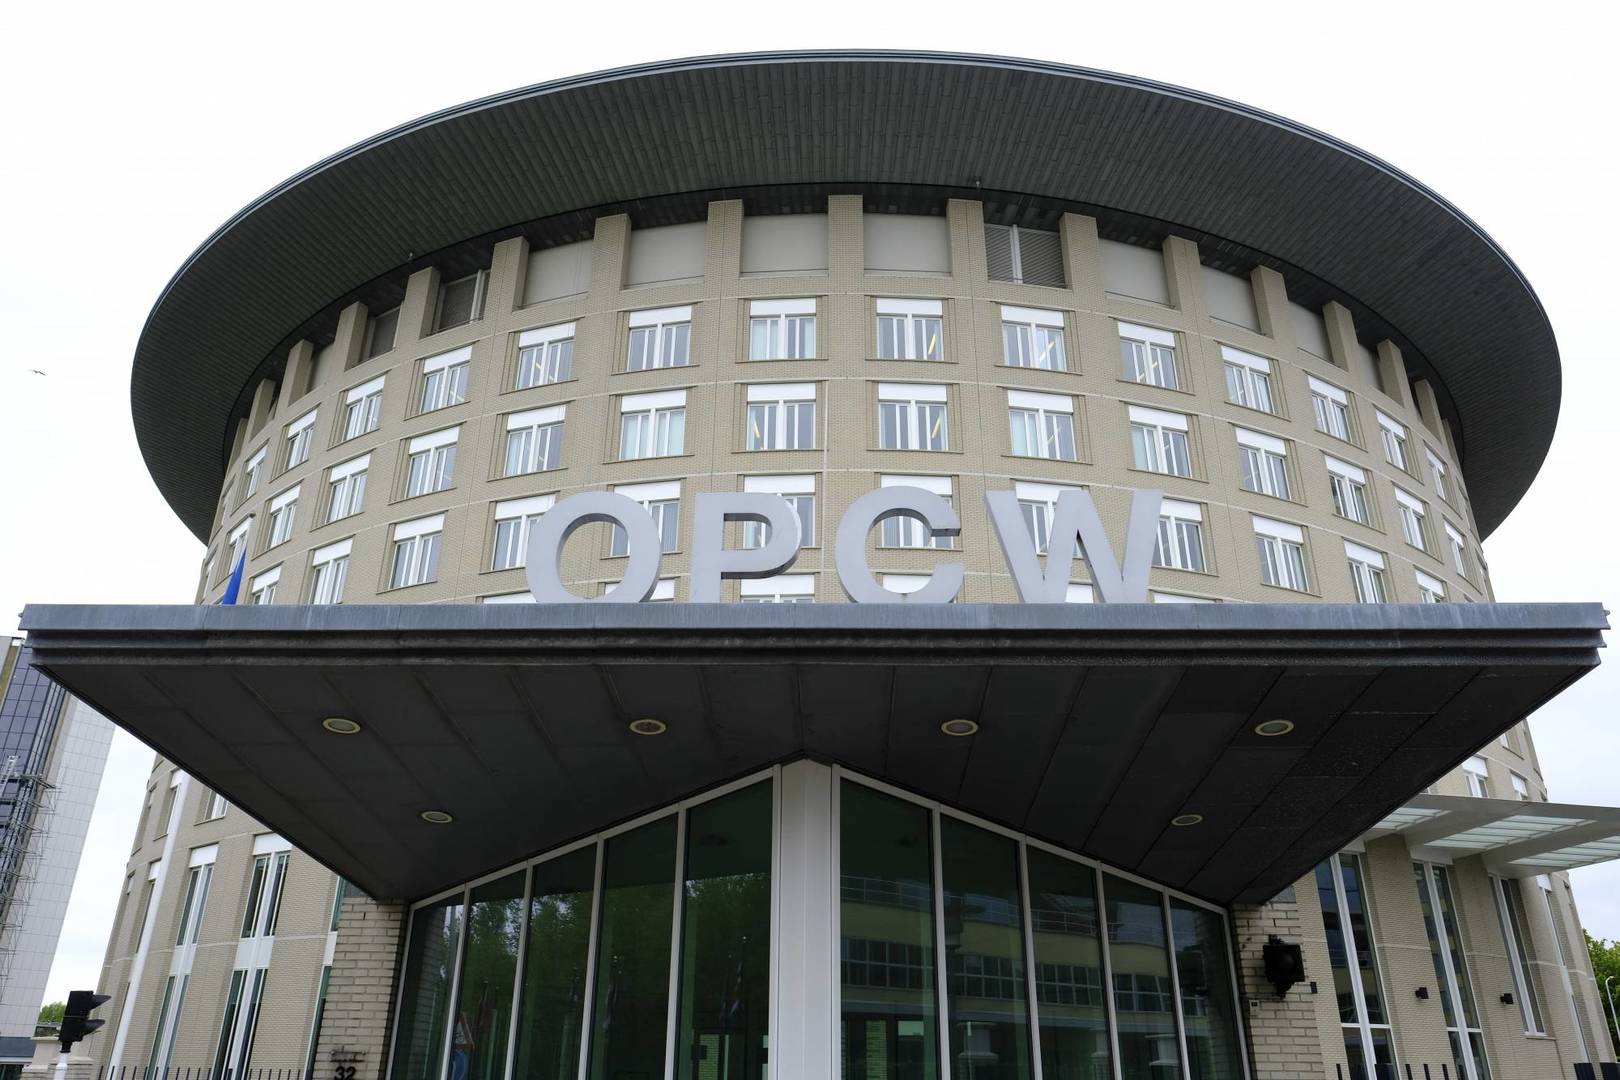 FILE - In this file photo taken on Friday, May 5, 2017, a view of the headquarters of the Organisation for the Prohibition of Chemical Weapons (OPCW), The Hague, Netherlands. Member states of the global chemical weapons watchdog are voicing concern that Syria may still possess such weapons after inspectors discovered traces of what could be a byproduct of a nerve agent or poison gas. In a report tabled Tuesday, July 9, 2019 at the Organization for the Prohibition of Chemical Weapons’ Executive Council, the organization’s director-general says the traces were found late last year at Syria’s Scientific Studies and Research Centre in Barza. (AP Photo/Peter Dejong, File)